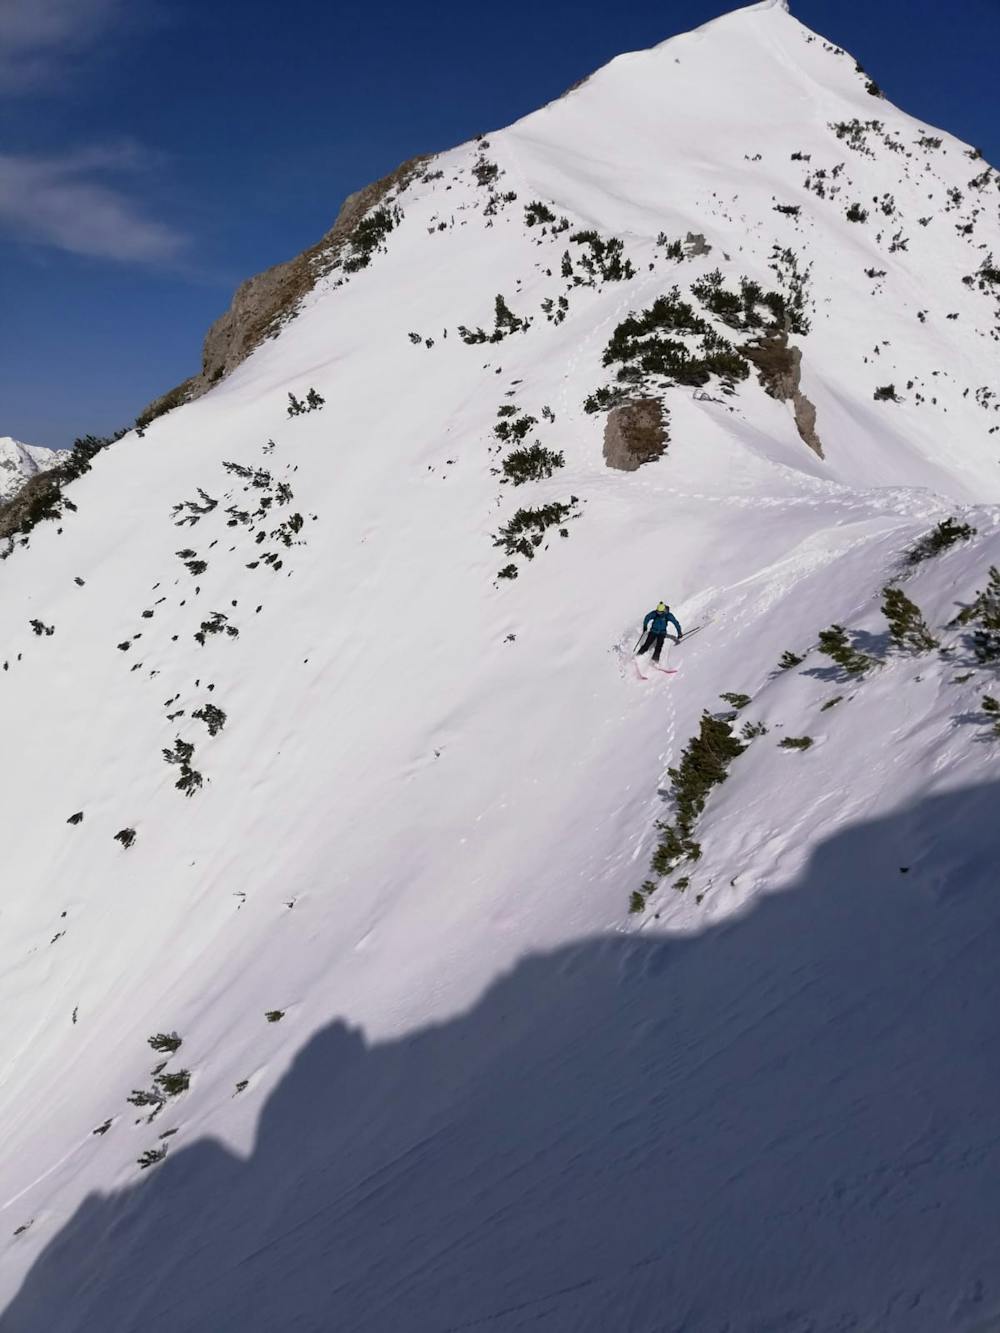 Dropping into the second gully.